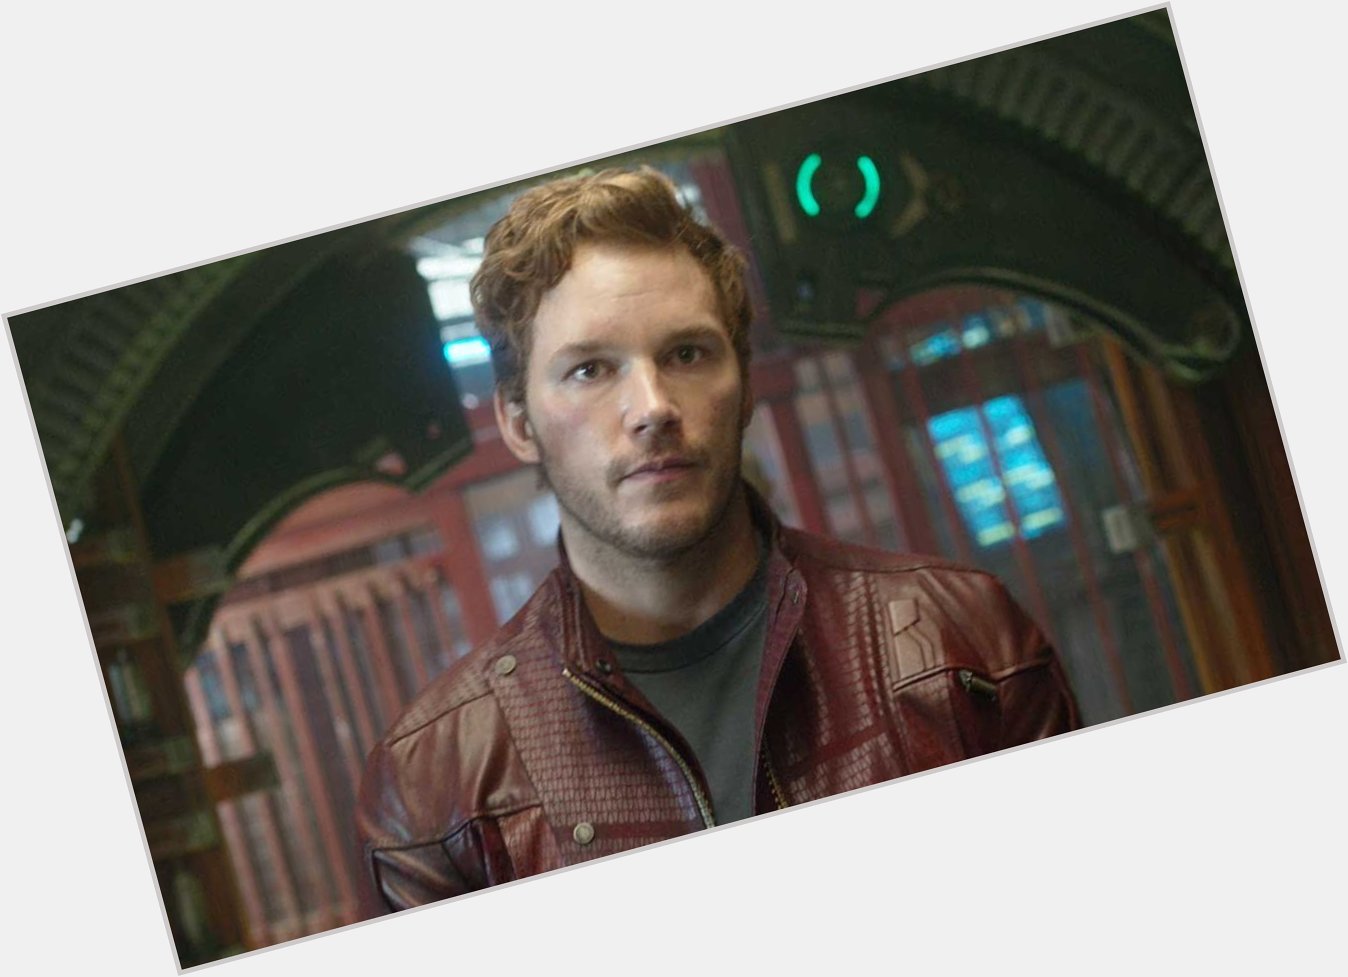 Happy Birthday to Chris Pratt aka Star Lord in guardians of the galaxy and avengers 